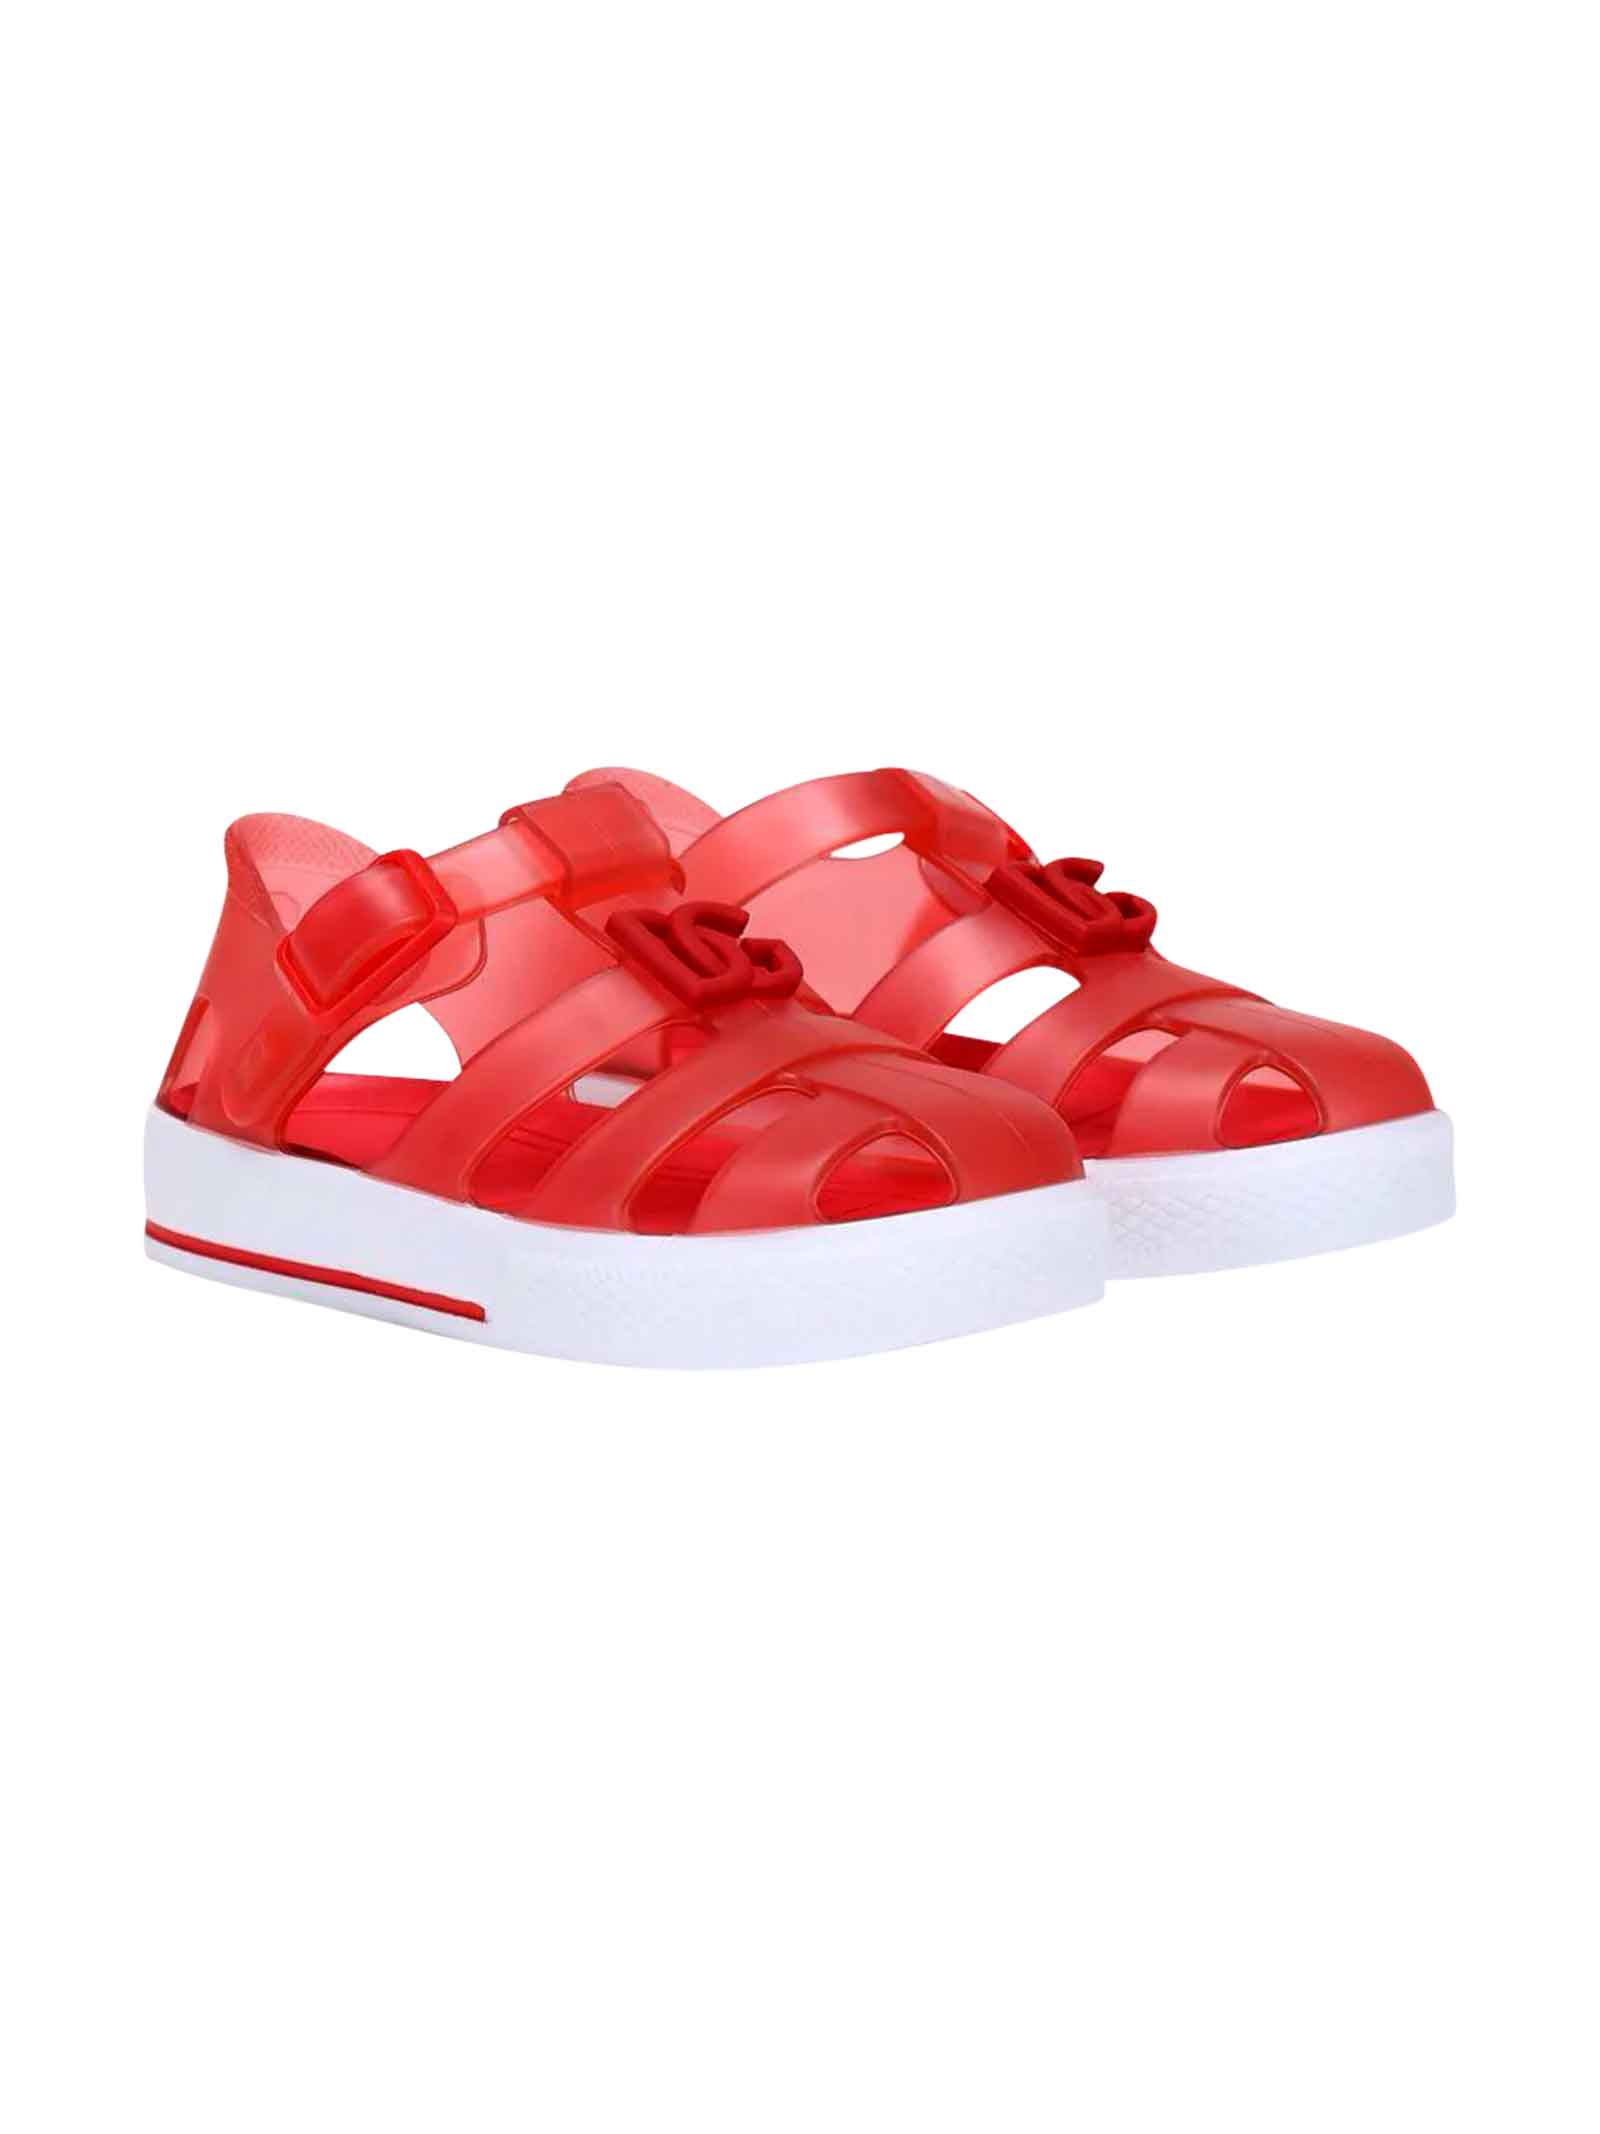 Dolce & Gabbana Red Sandals With Cage Tip